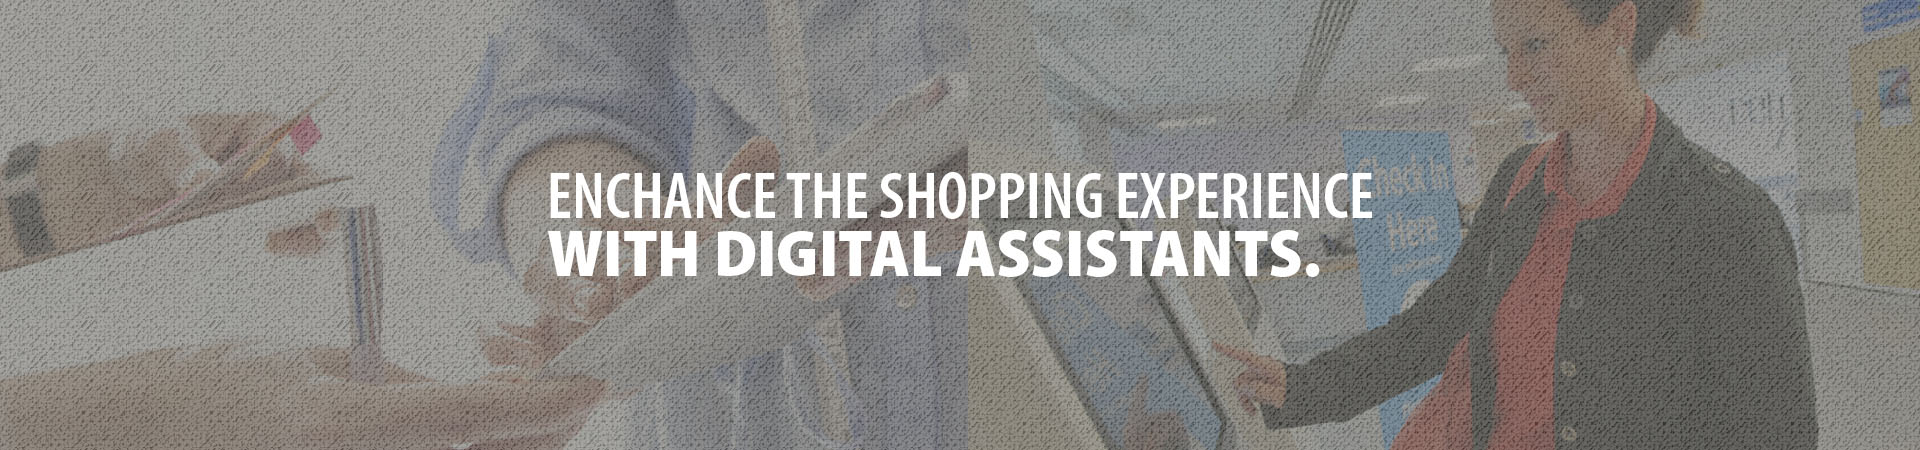 Enhance the shopping experience with digital assistants.